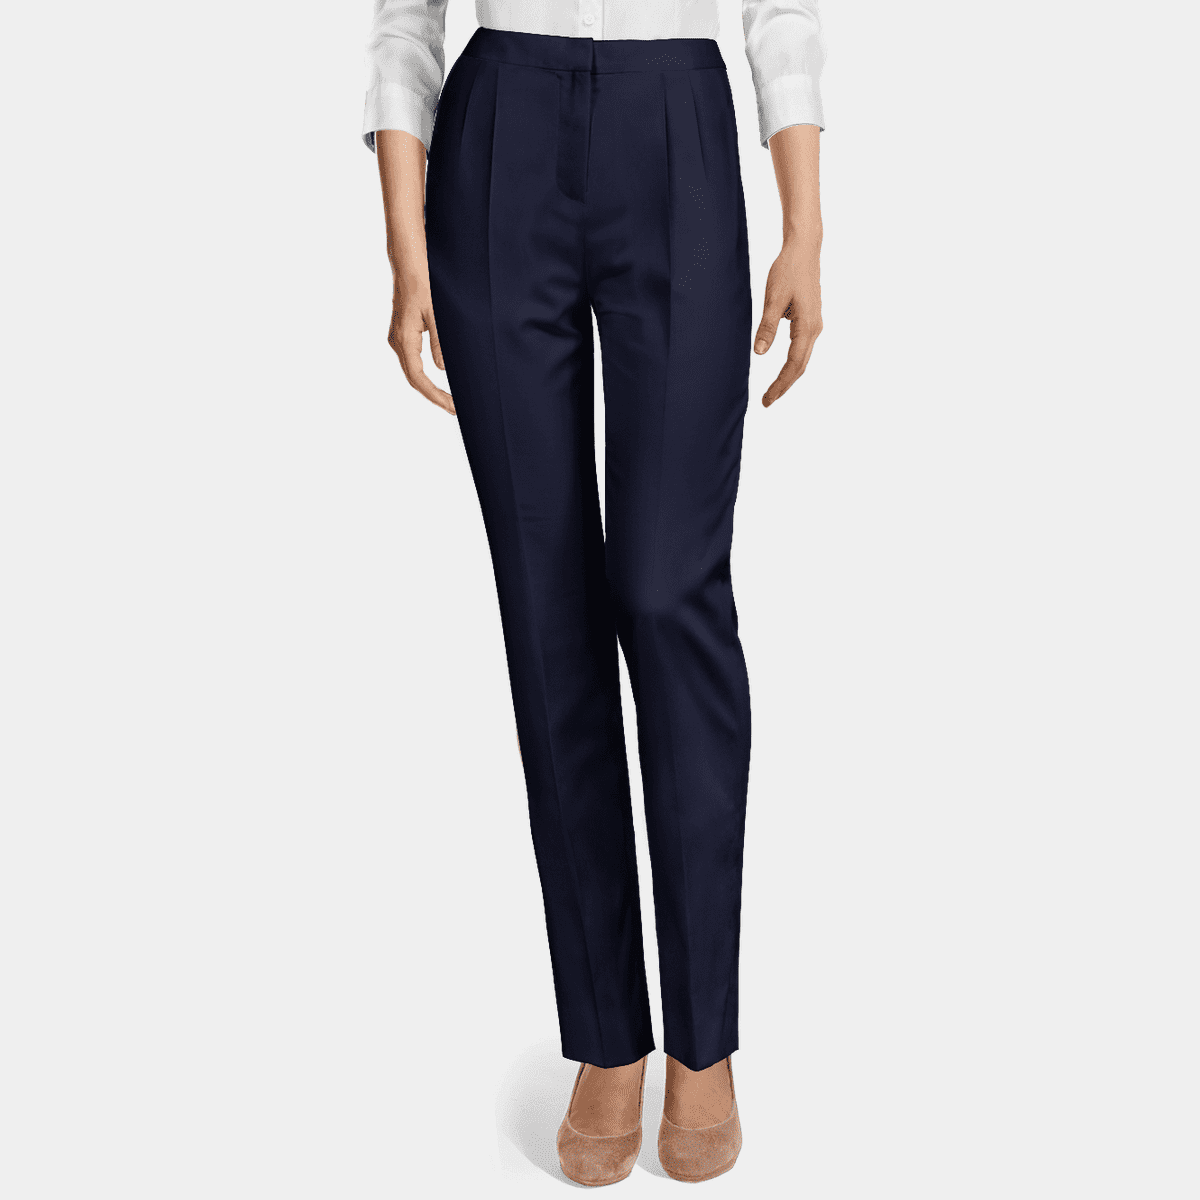 Navy blue high waisted pleated year-round Women Dress Pants